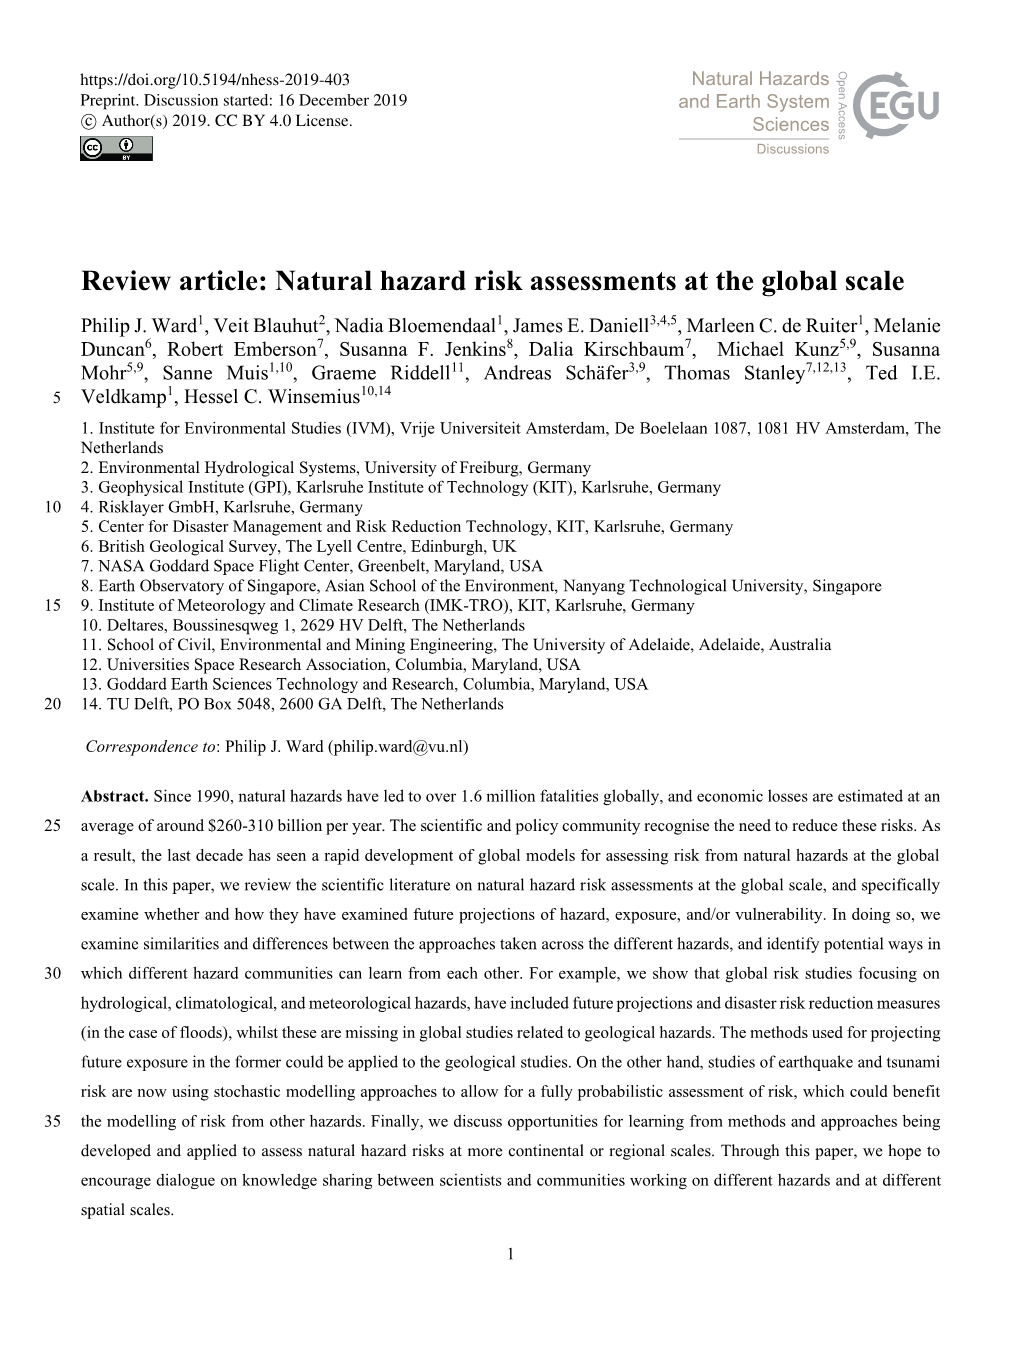 Review Article: Natural Hazard Risk Assessments at the Global Scale Philip J